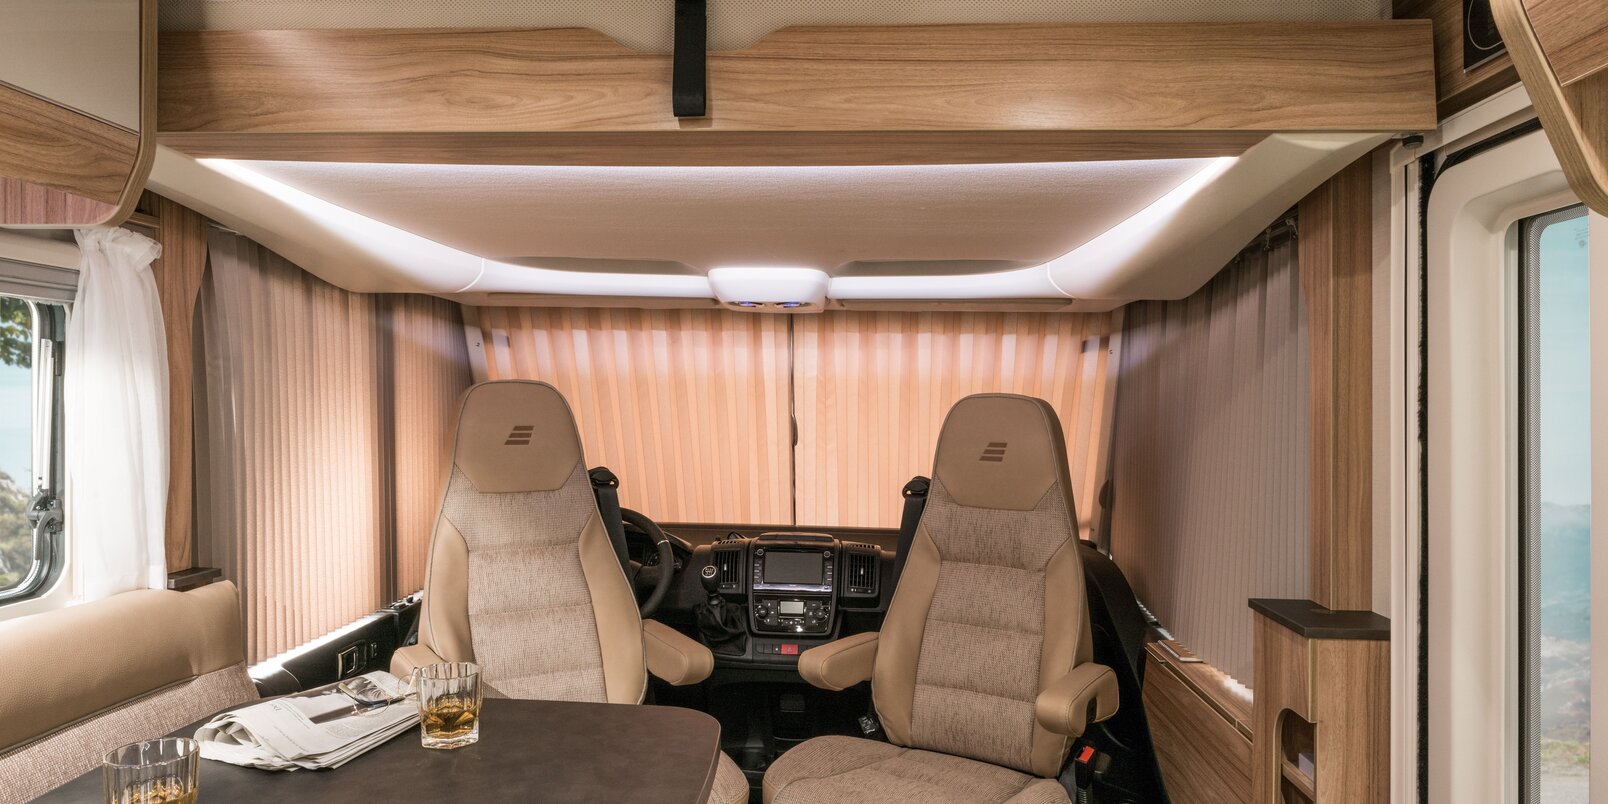 The driver's cab area darkened with a folding curtain, driver's seats, seating area and table with glasses and newspaper in the HYMER Exsis-i